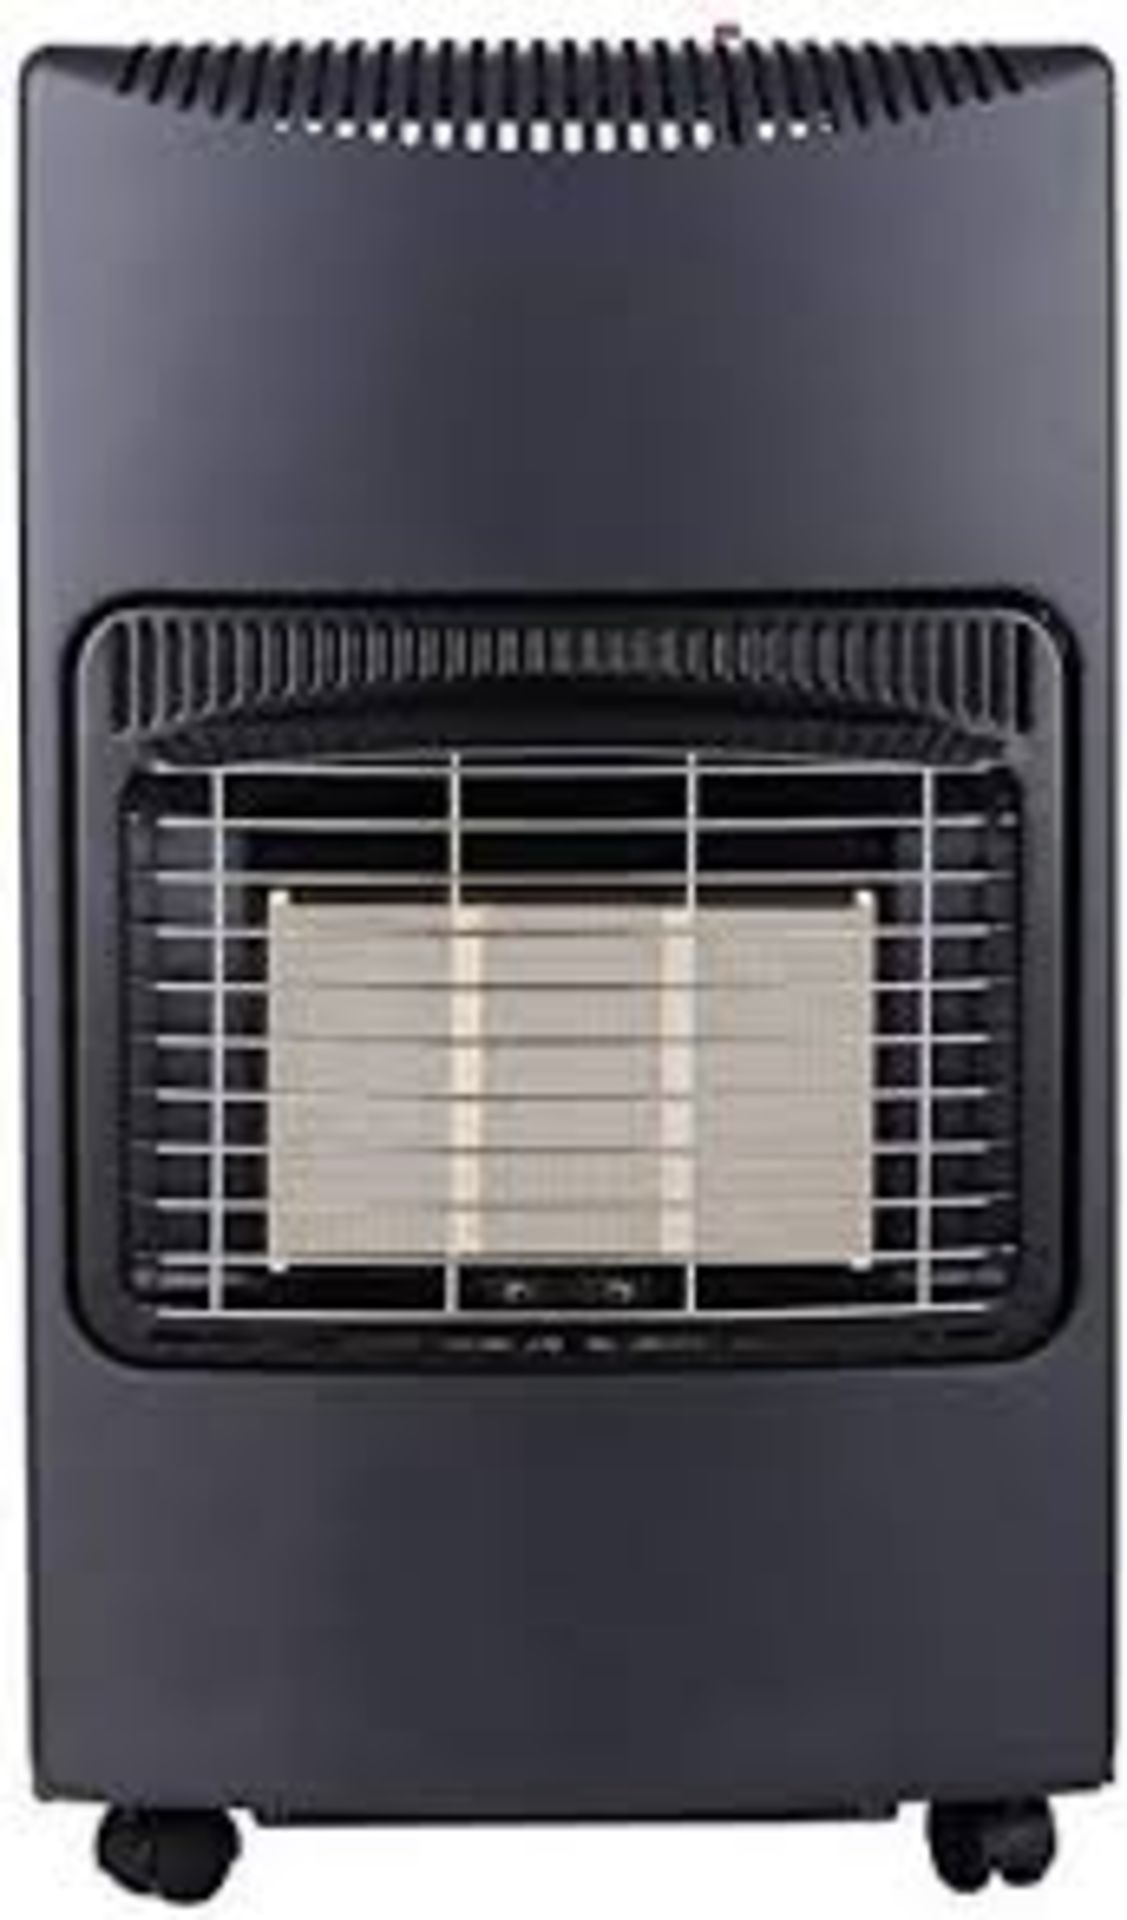 Boxed Igenix Triple Heat Setting Black 4.2KW Gas Heater RRP £50 (Appraisals Available Upon